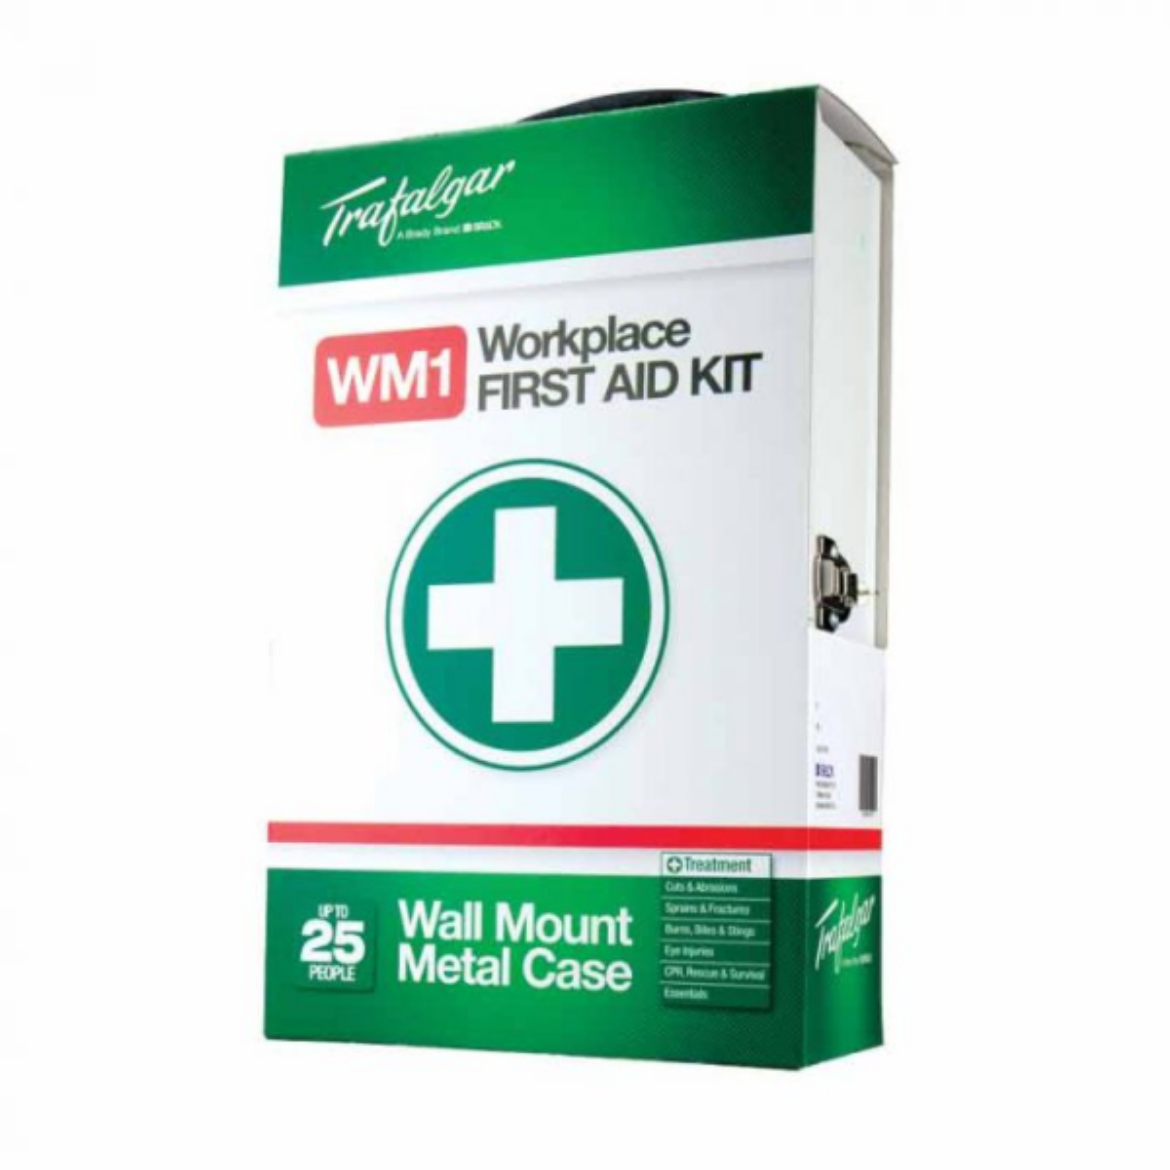 Picture of WM1 WORKPLACE FIRST AID KIT WALL MOUNT - METAL CASE